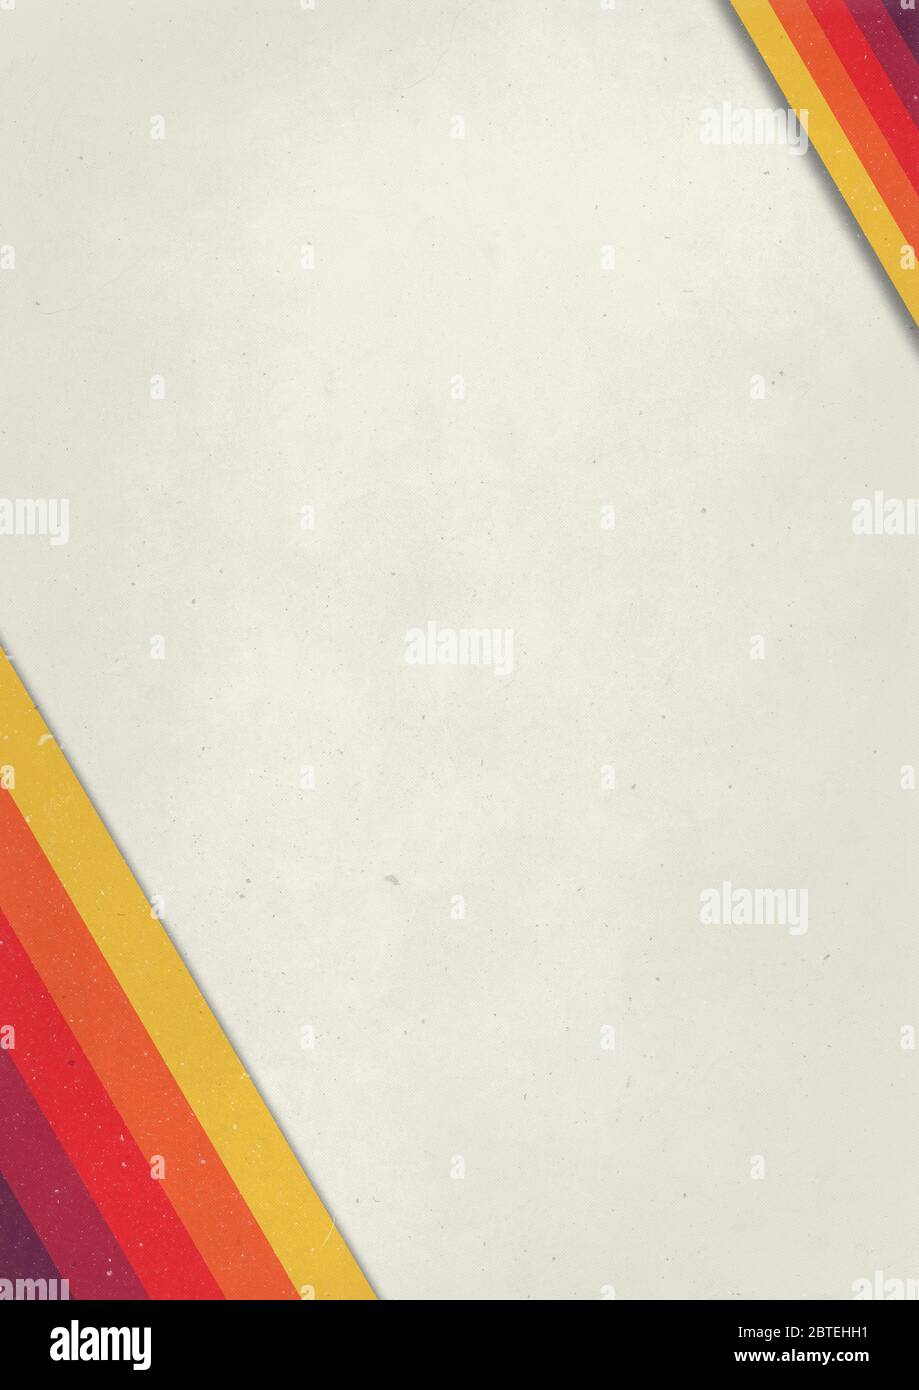 A retro 1970's or 1980's portrait graphic background design for use as a  product, poster or flyer background with yellow, orange and red corner  stripe Stock Photo - Alamy